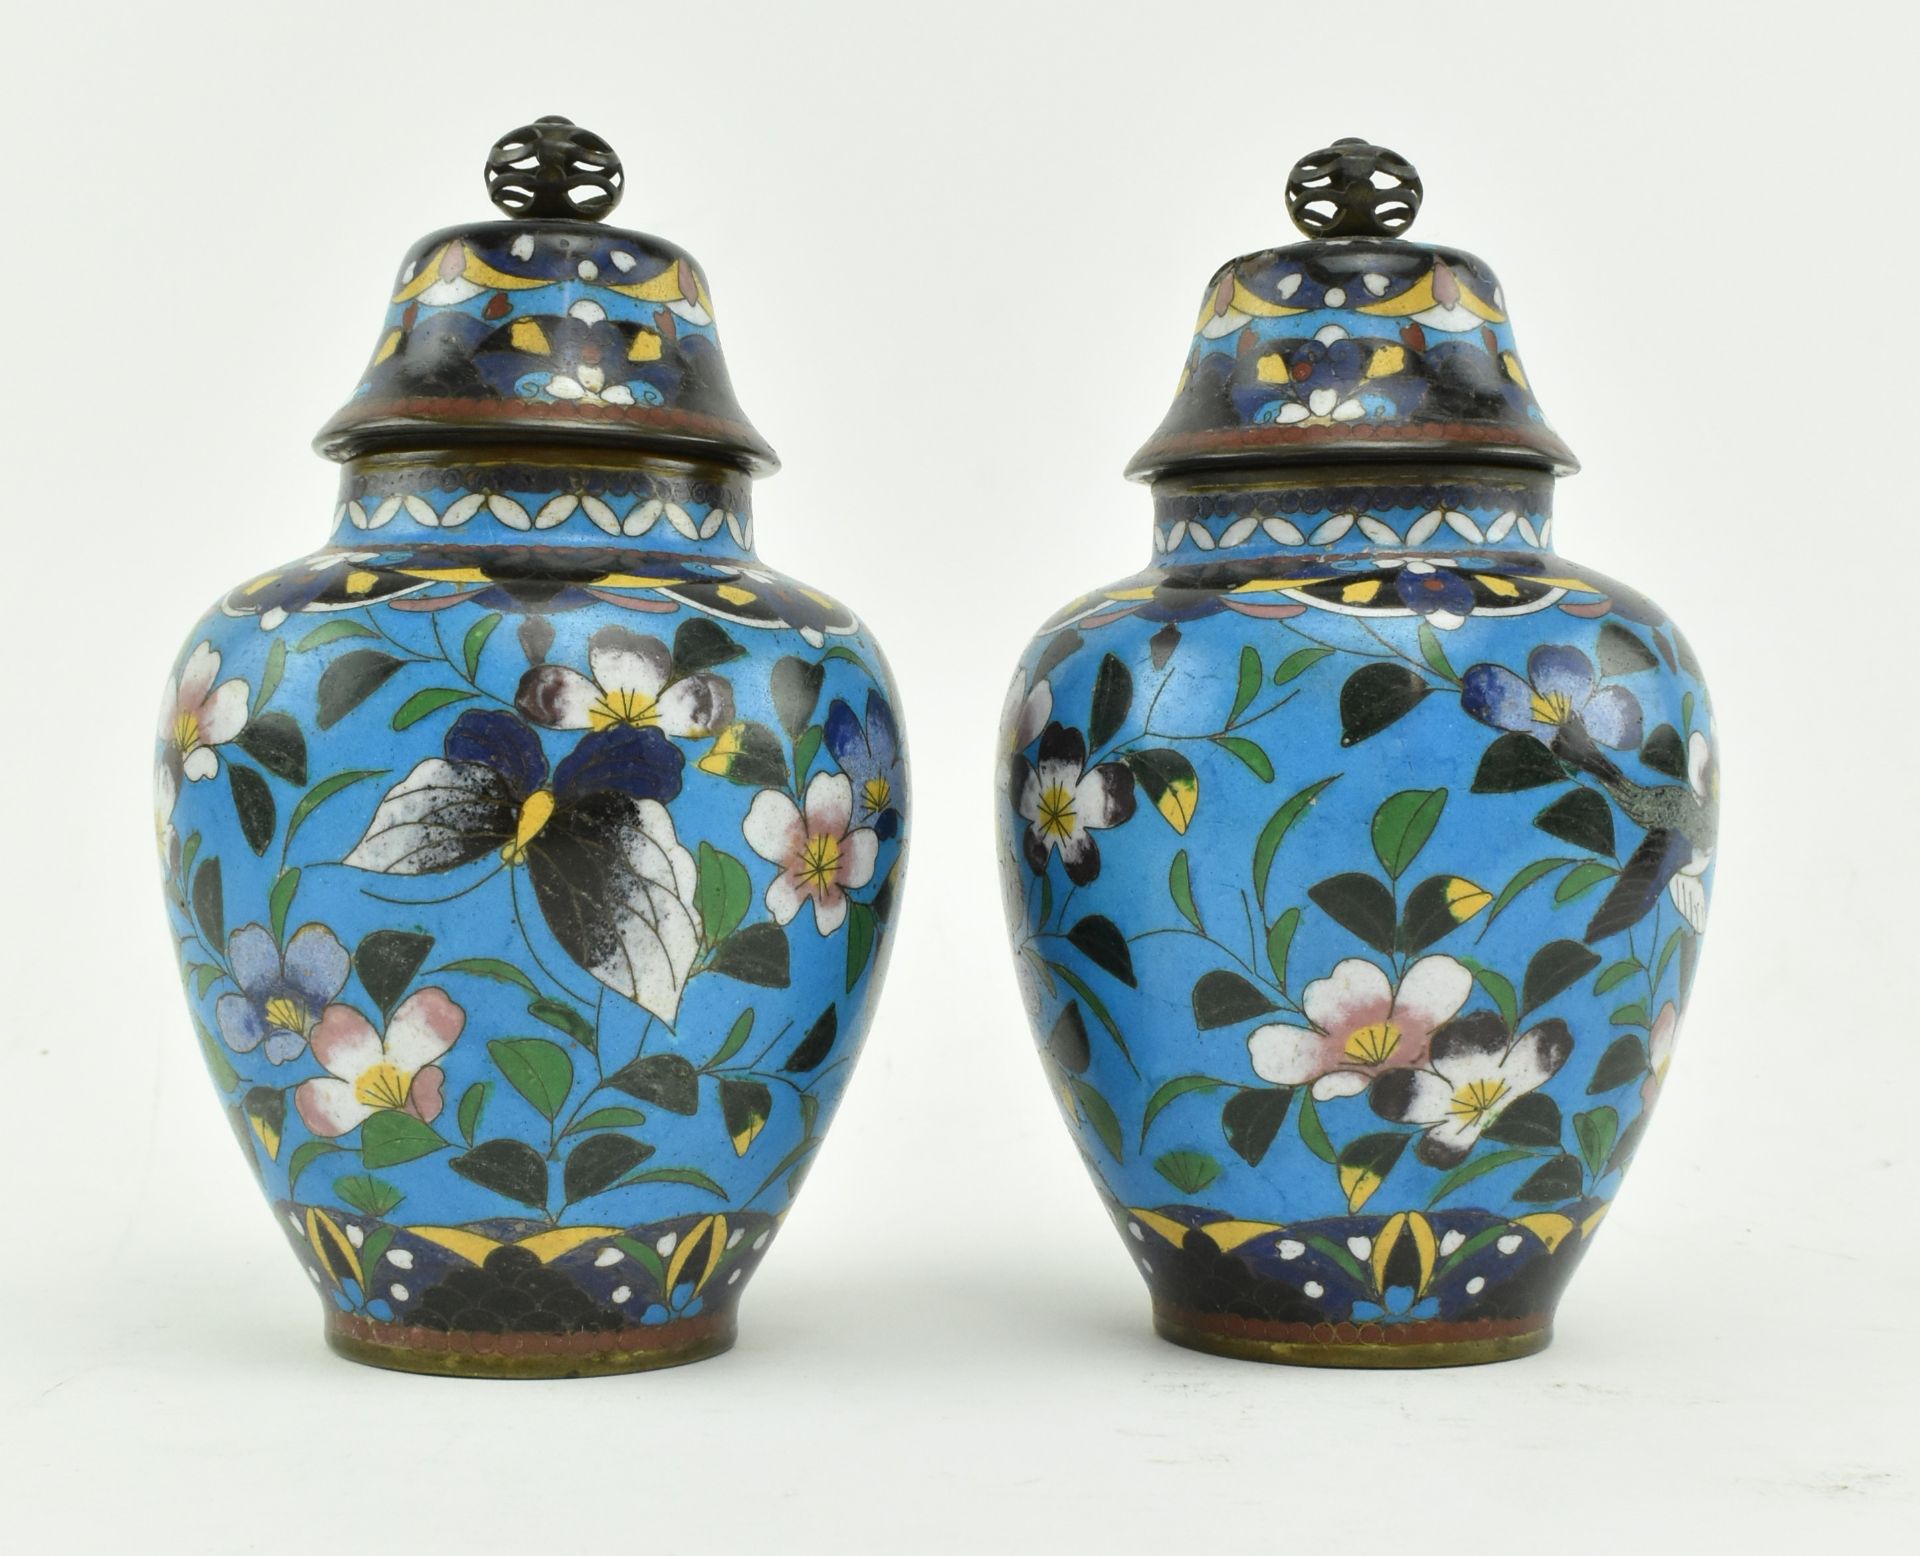 PAIR OF JAPANESE MEIJI PERIOD CLOISONNE JARS WITH COVER - Image 5 of 6